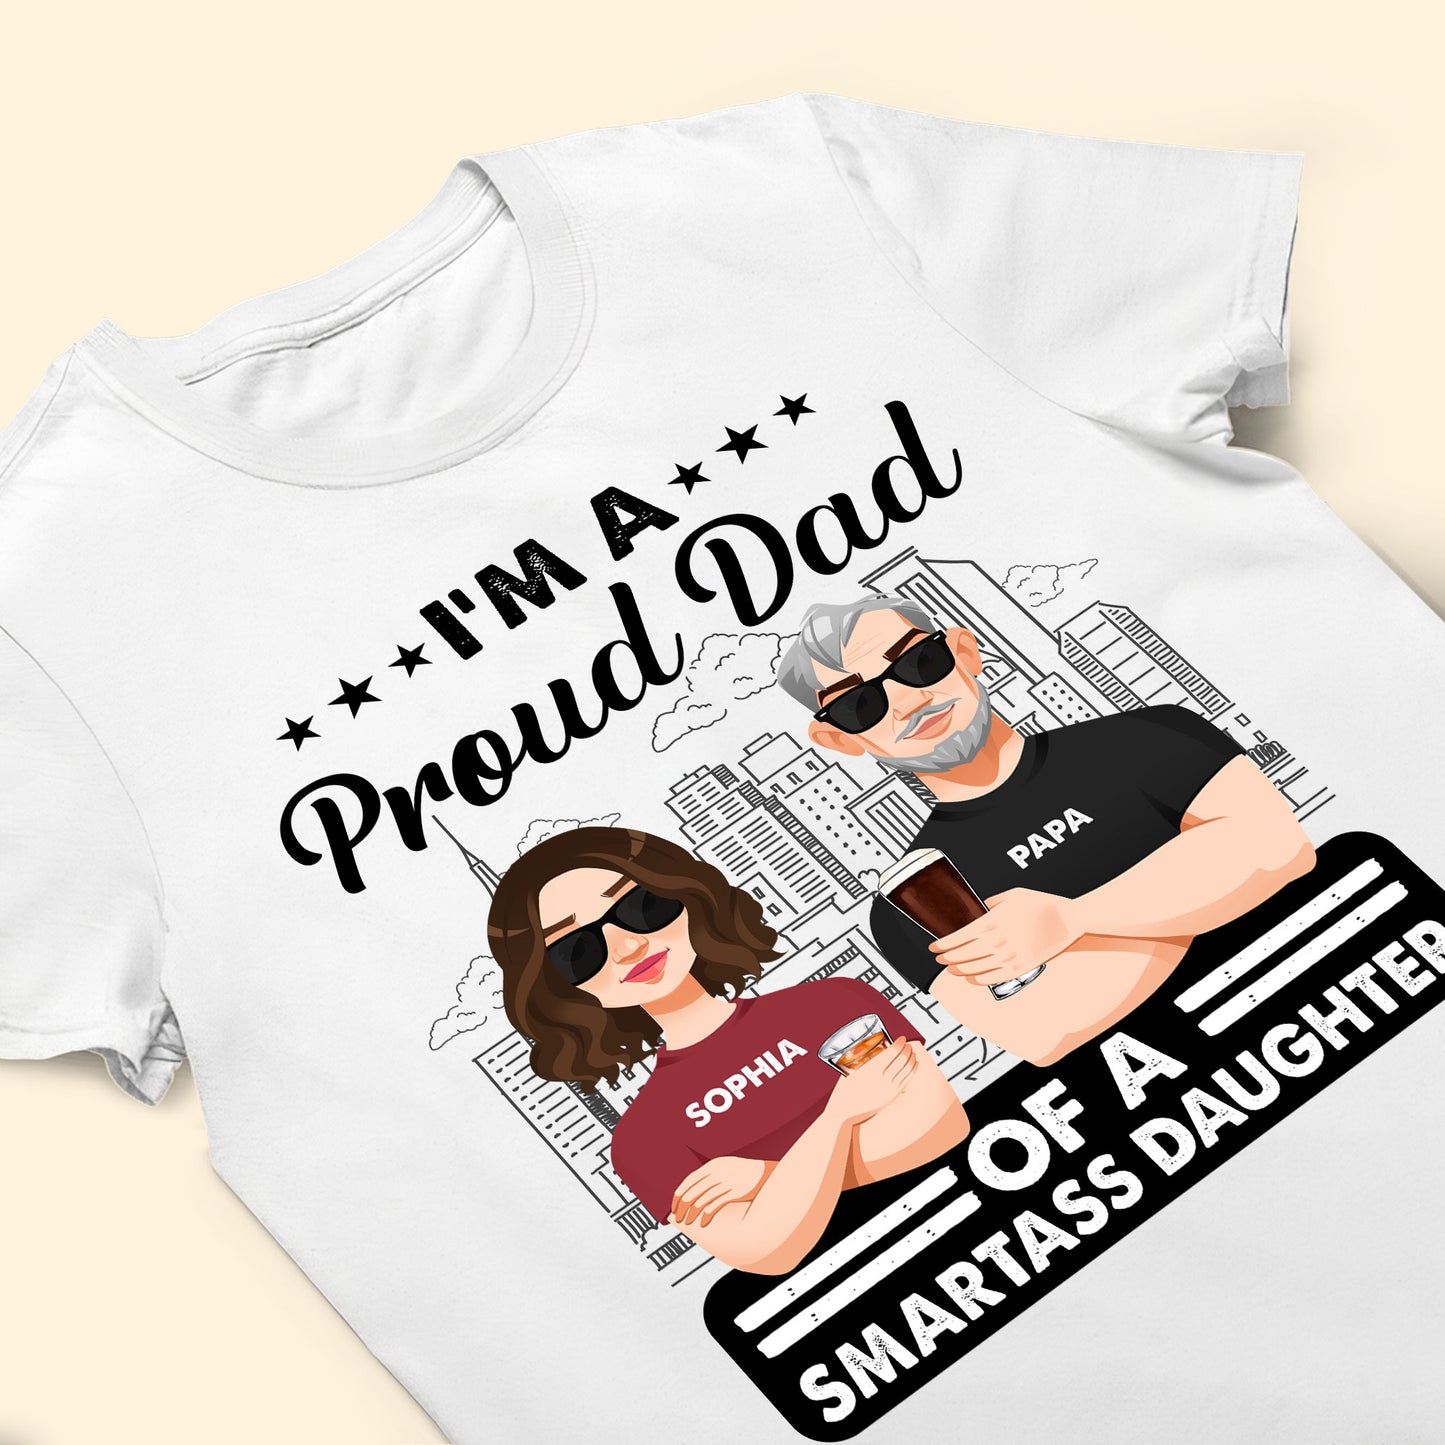 Proud Dad Of Smartass Daughter - Personalized Shirt